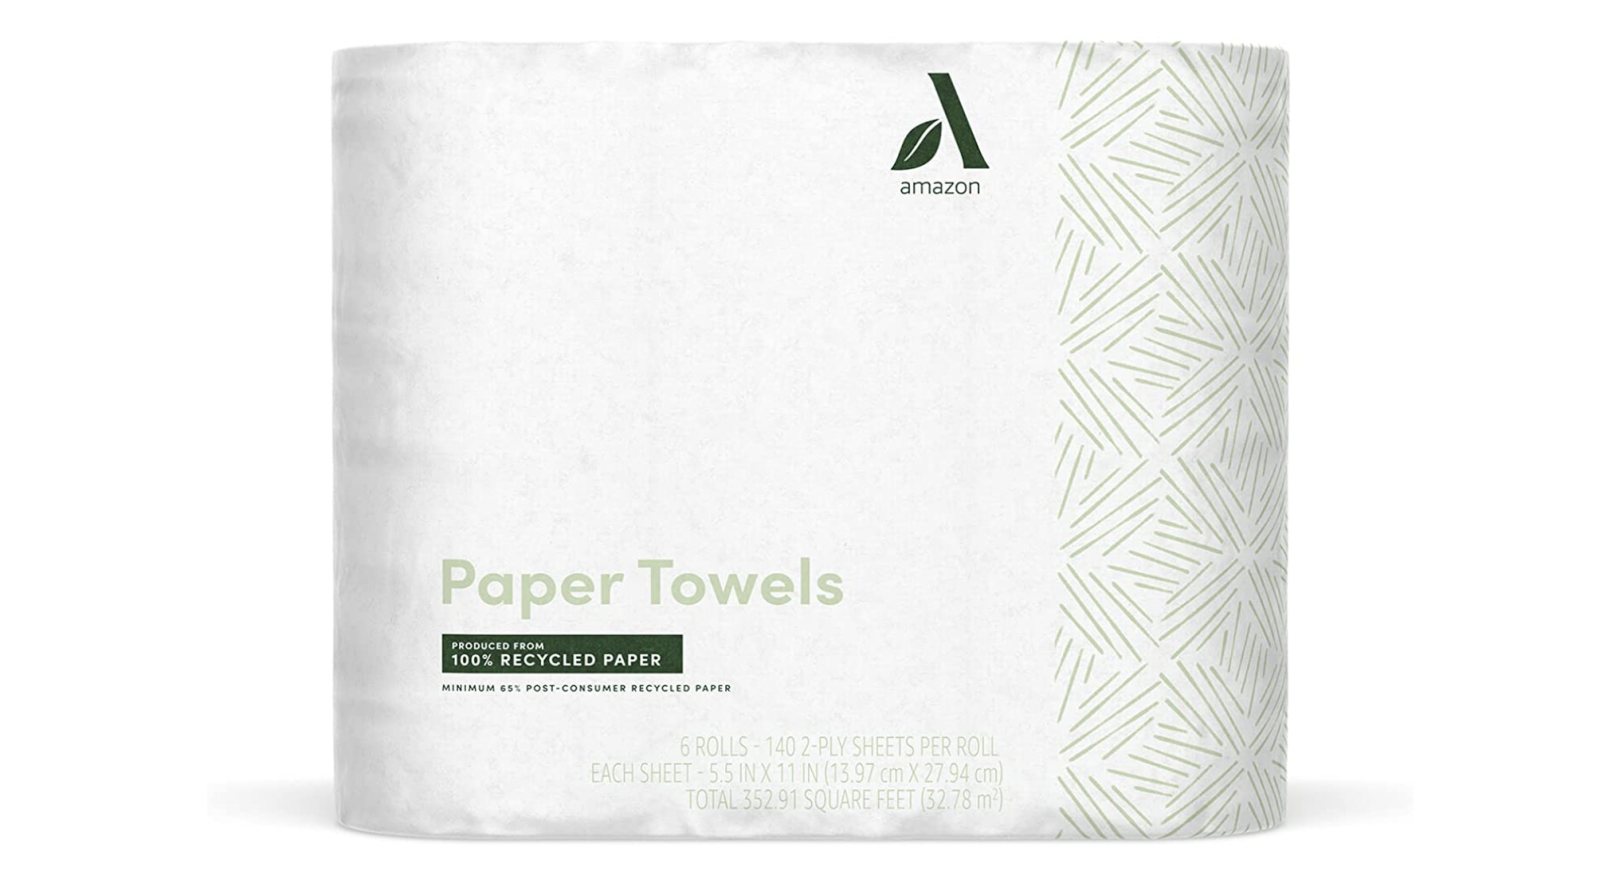 Amazon Aware new line with recycled paper towels